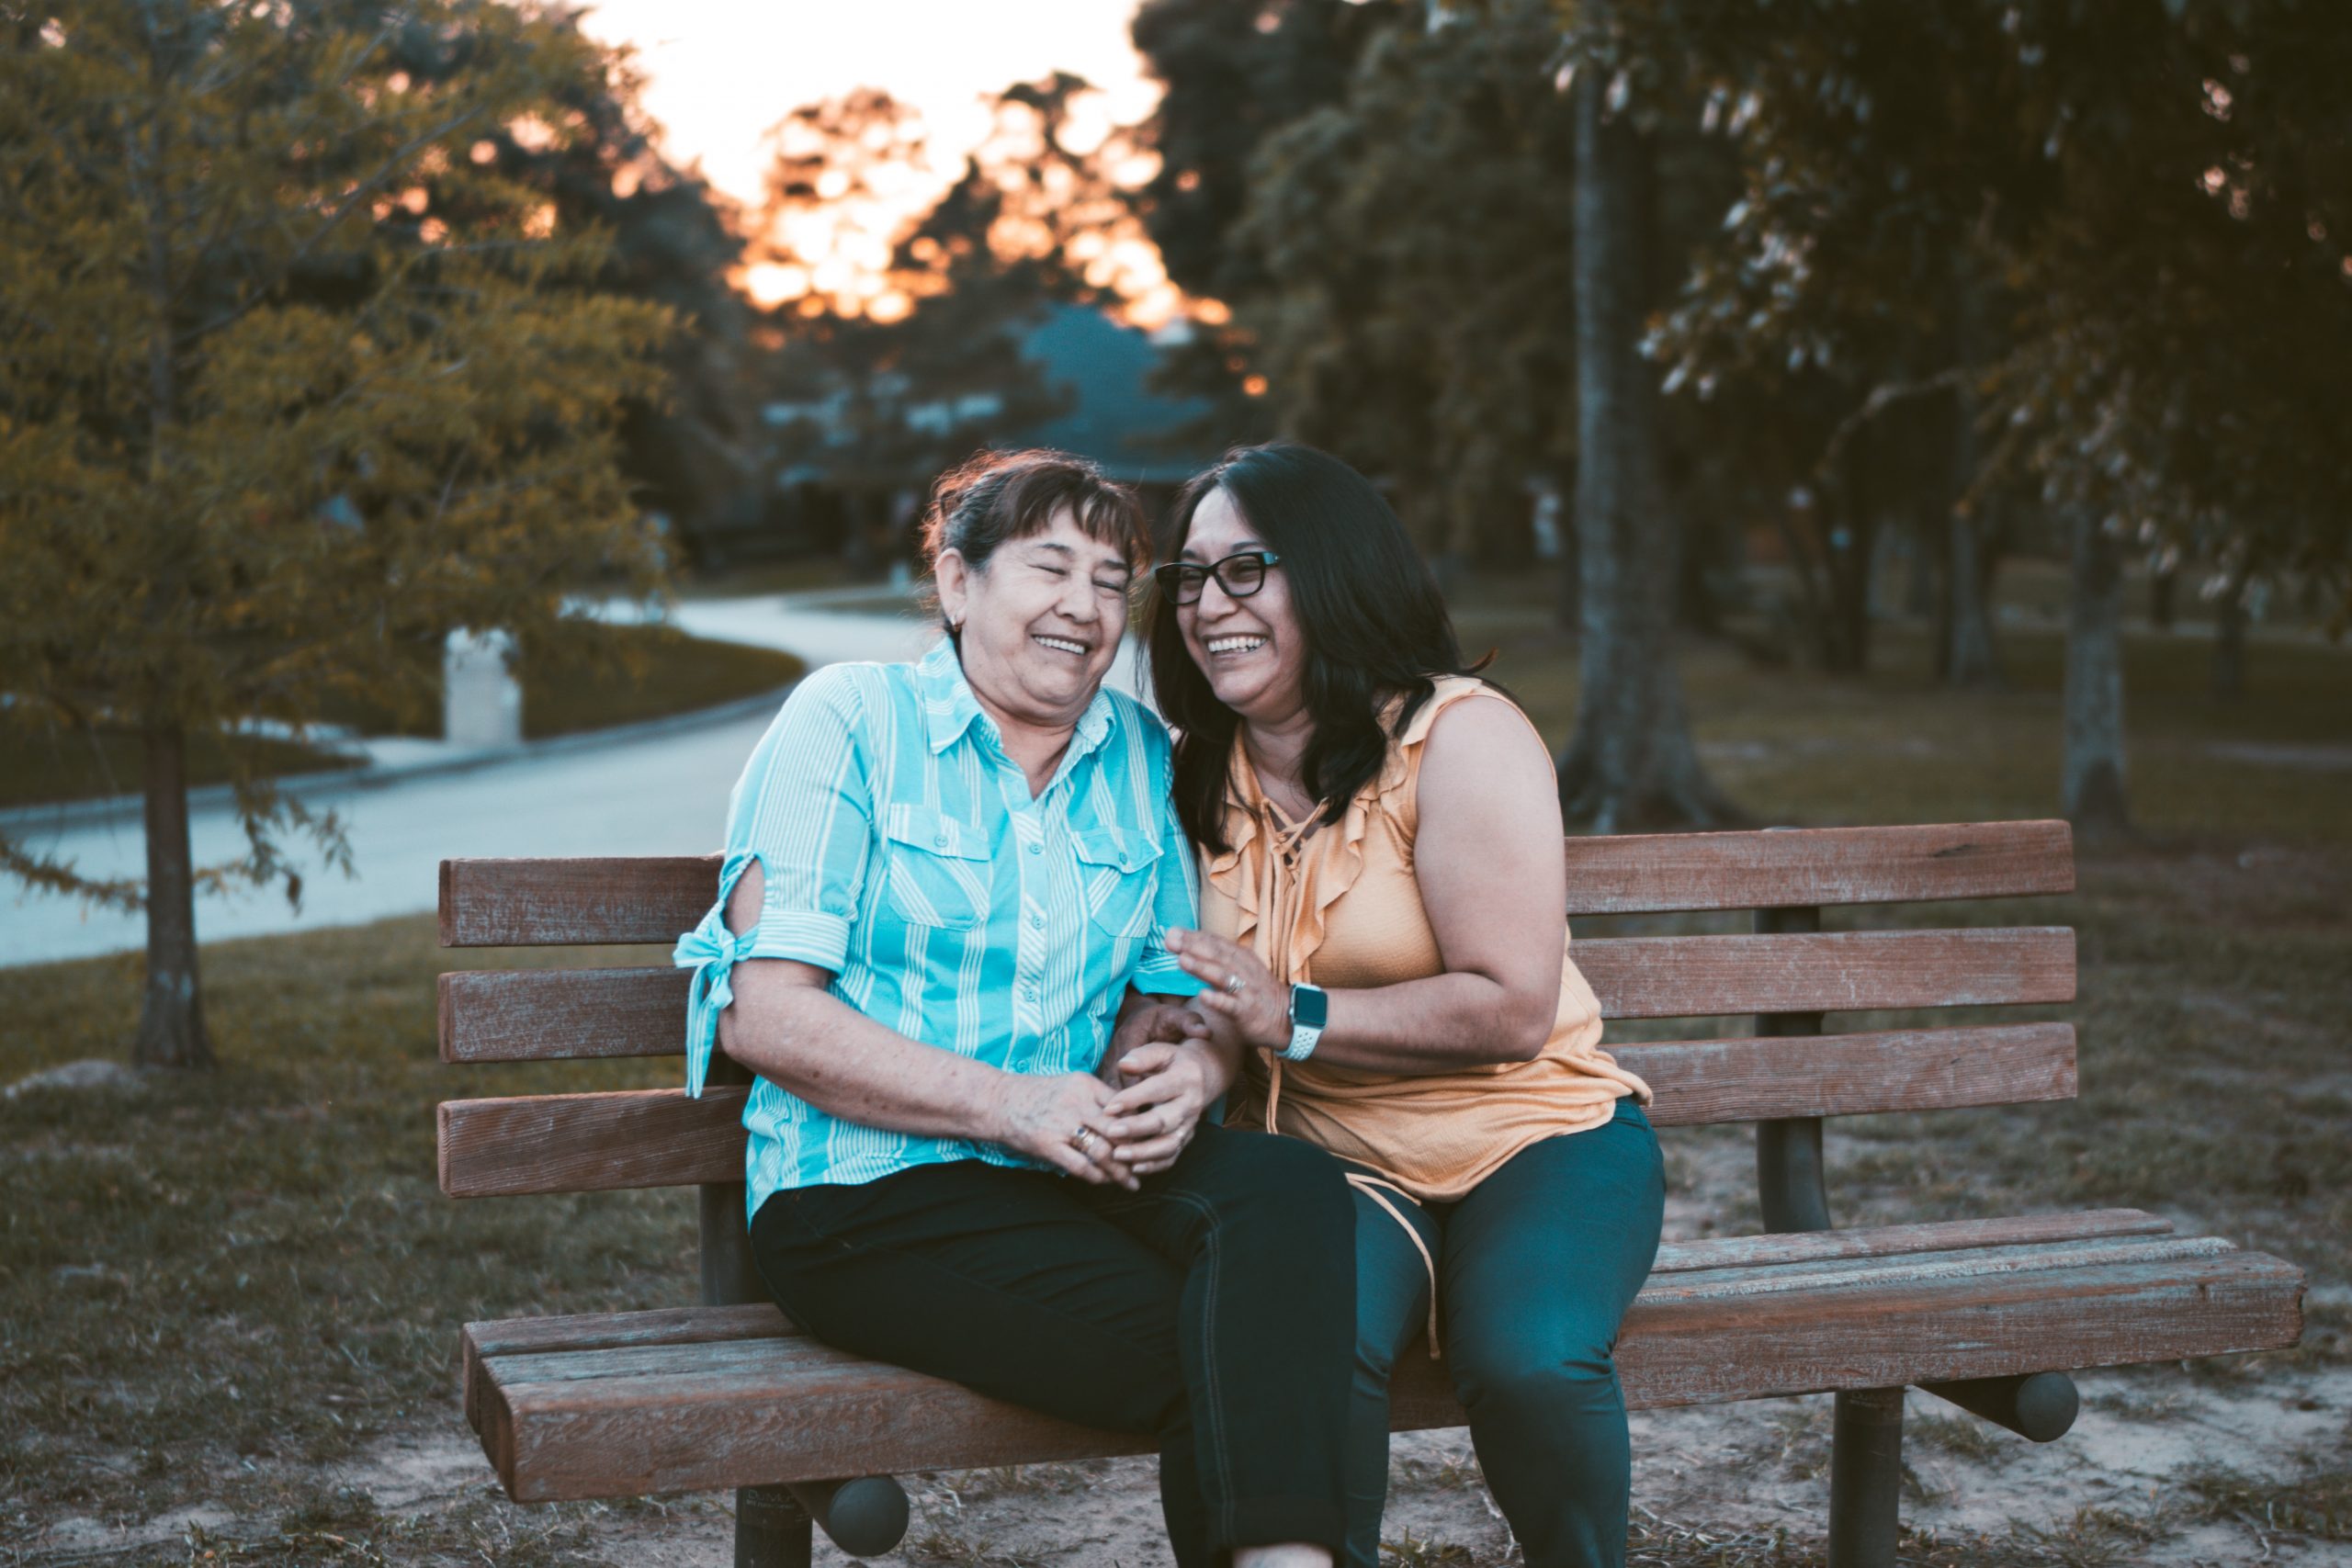 Two middle aged Hispanic women sit on a bench and laugh together